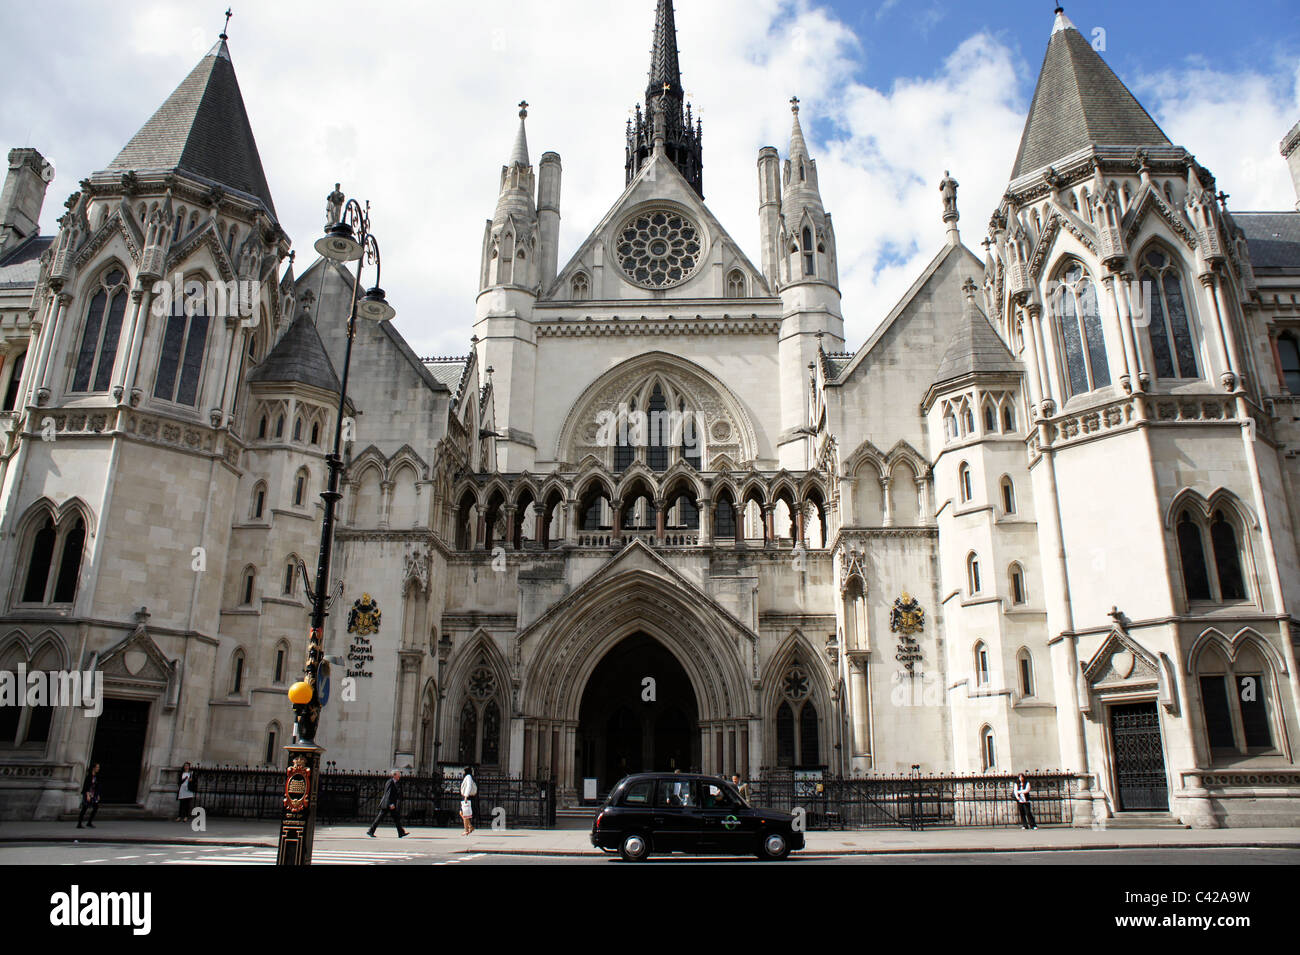 The Royal Court of Justice, London Stock Photo